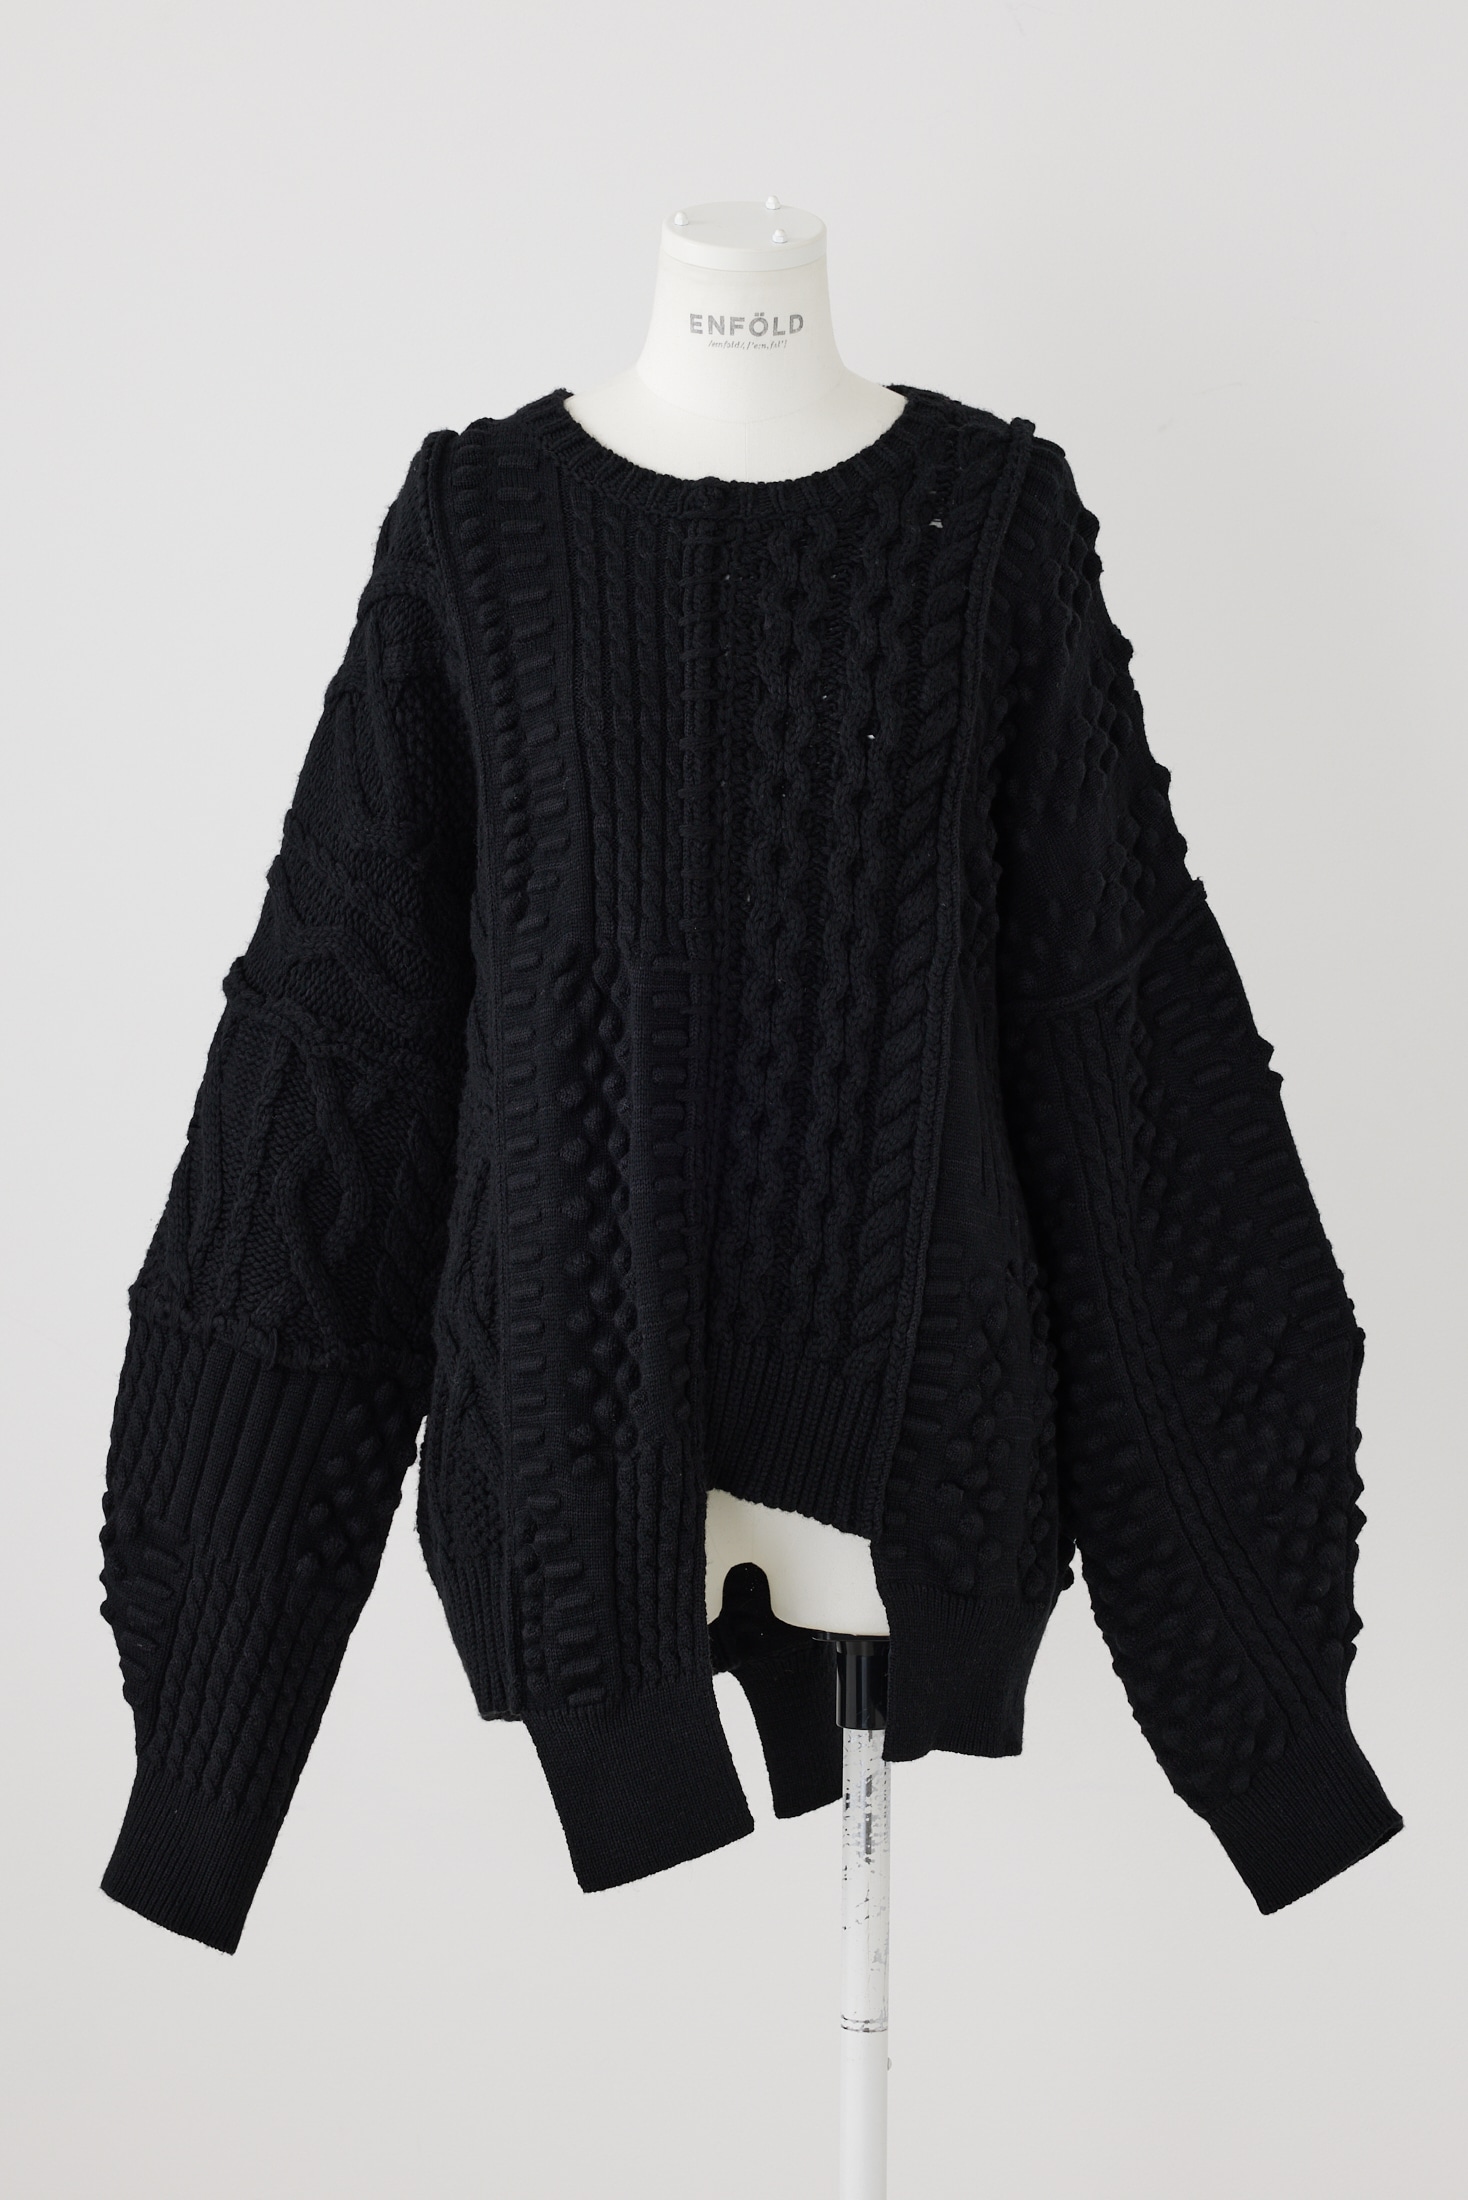 BLACKCABLE PULLOVER BLACK